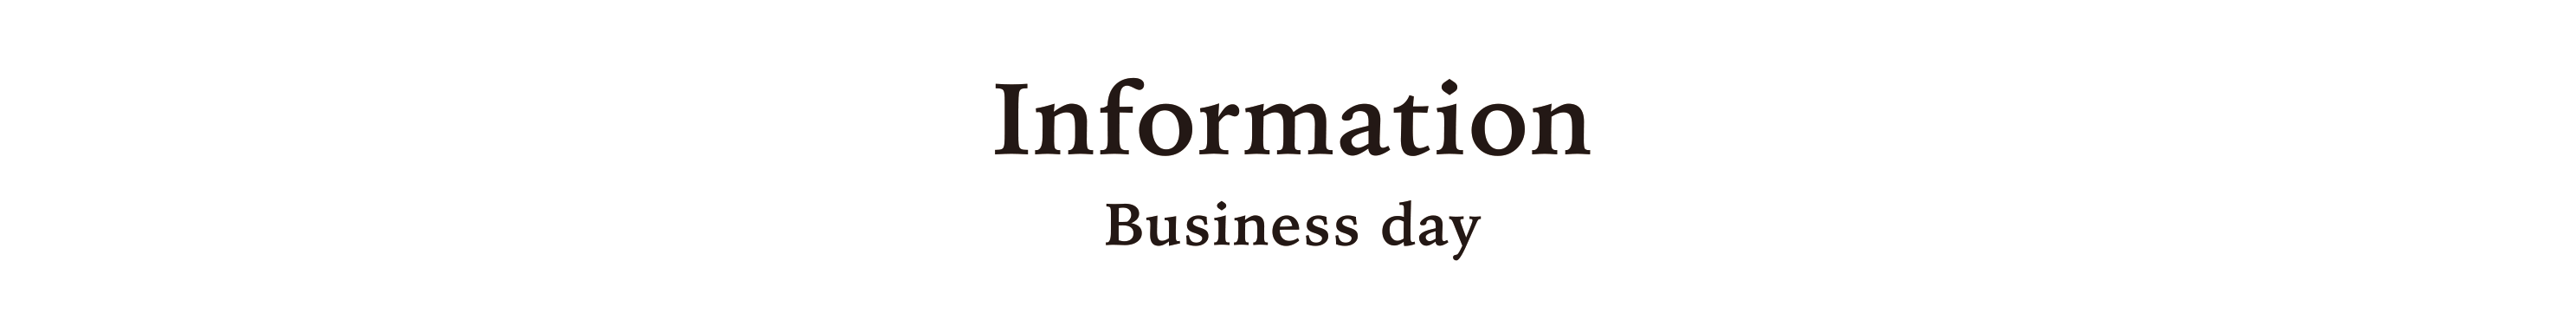 Information Business day